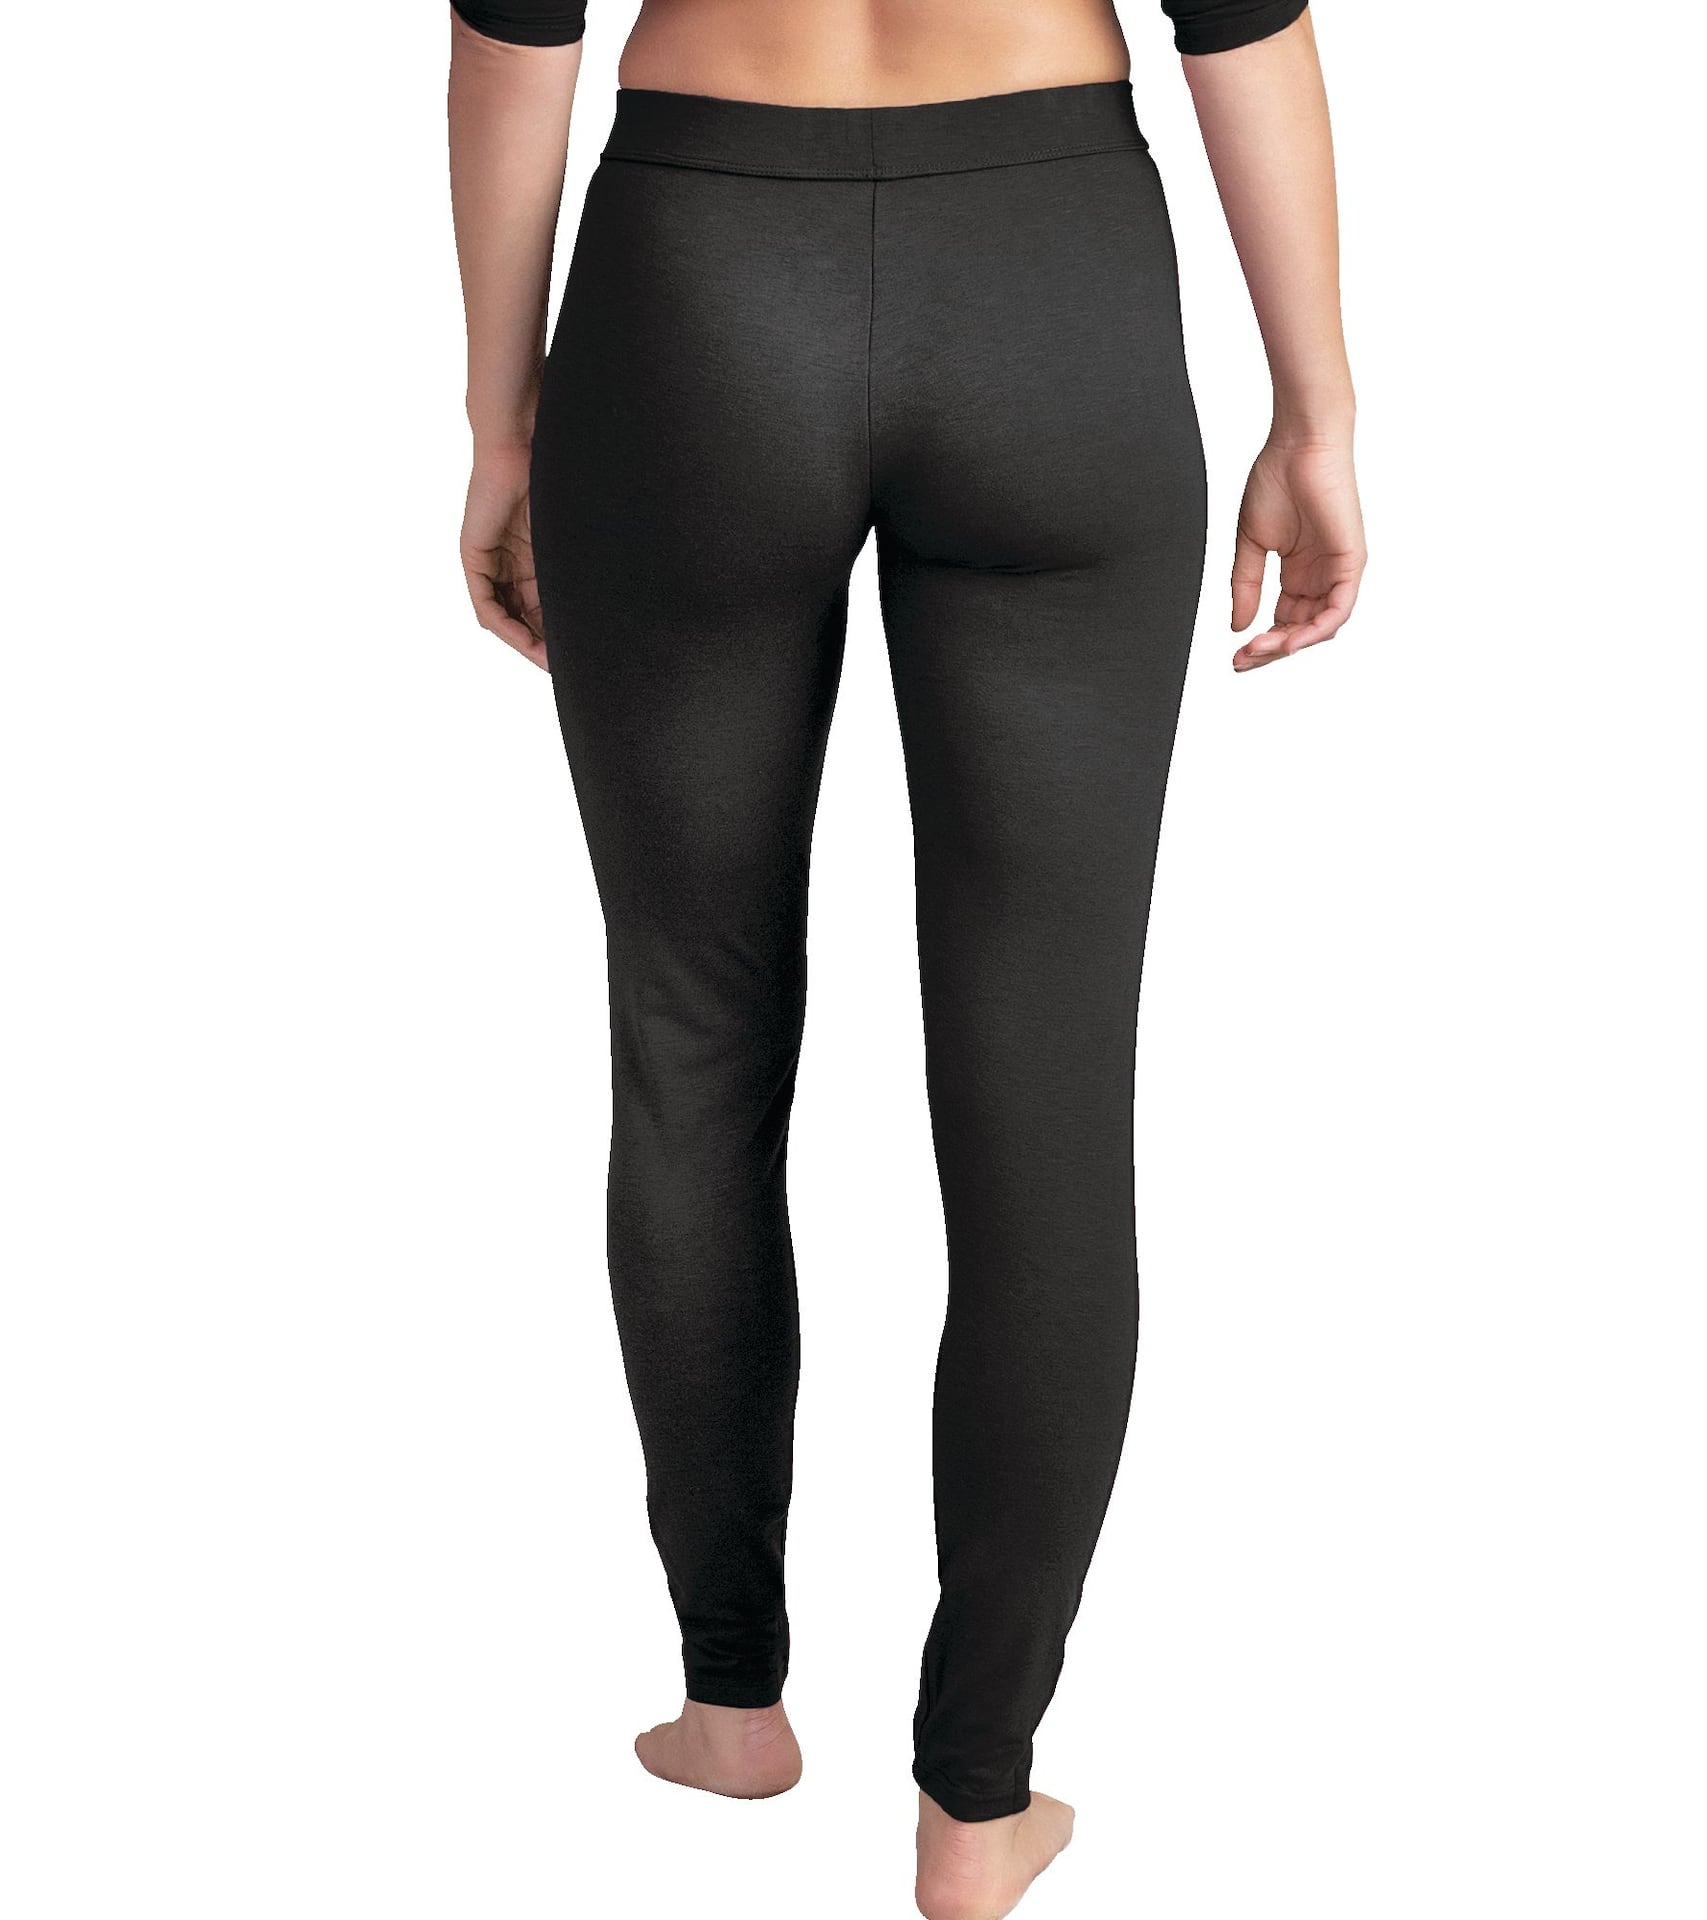 Women's Front And Rear Heated Pants Washable Warm Heated Level